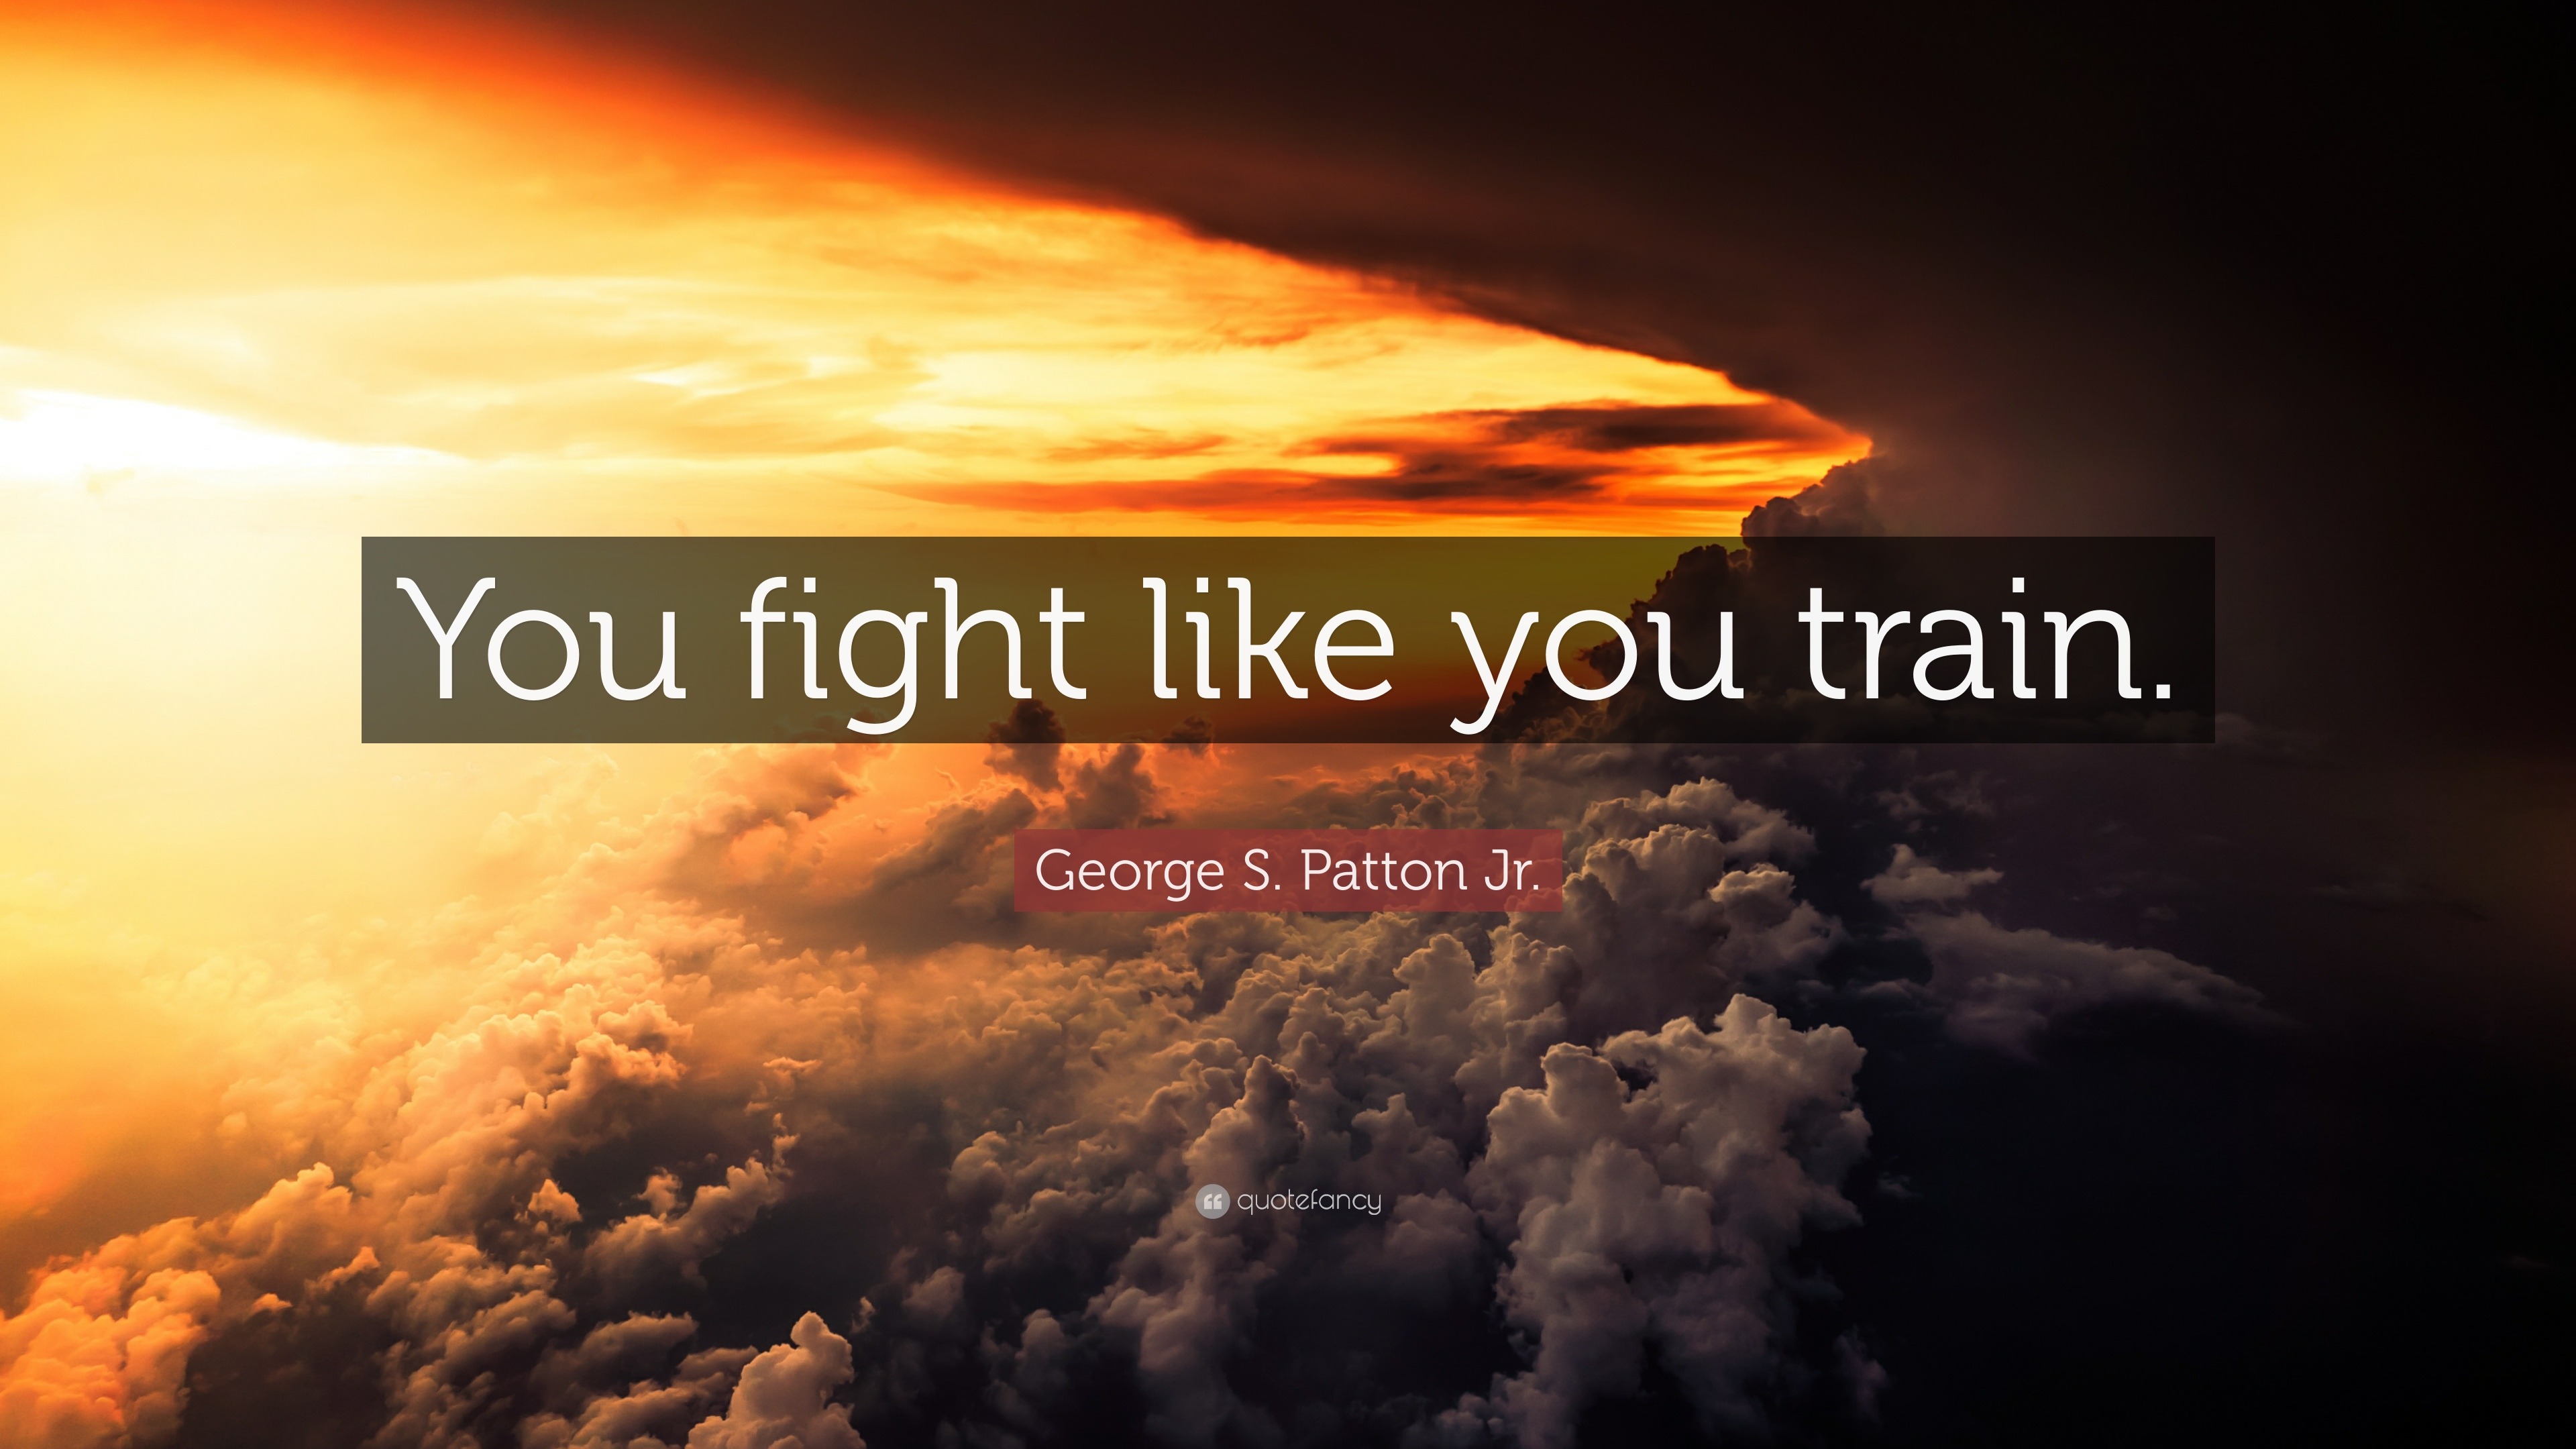 George S. Patton quote: You fight like you train.